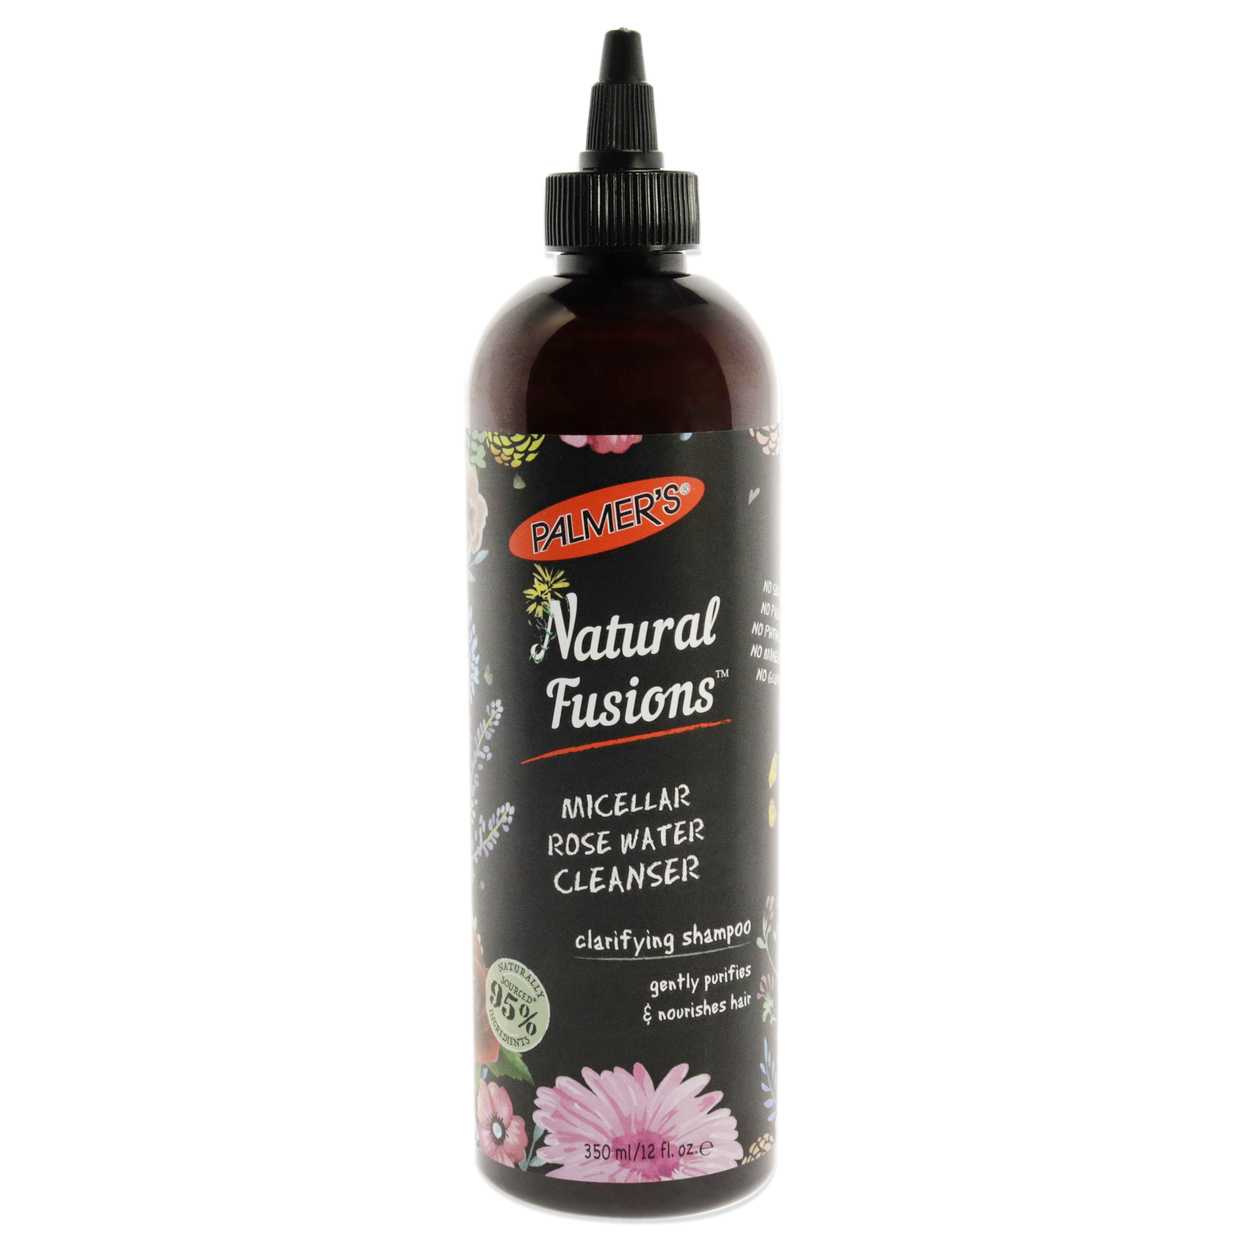 Palmers Natural Fusions Micellar Rose Water Cleanser Clarifying Shampoo 12 Oz